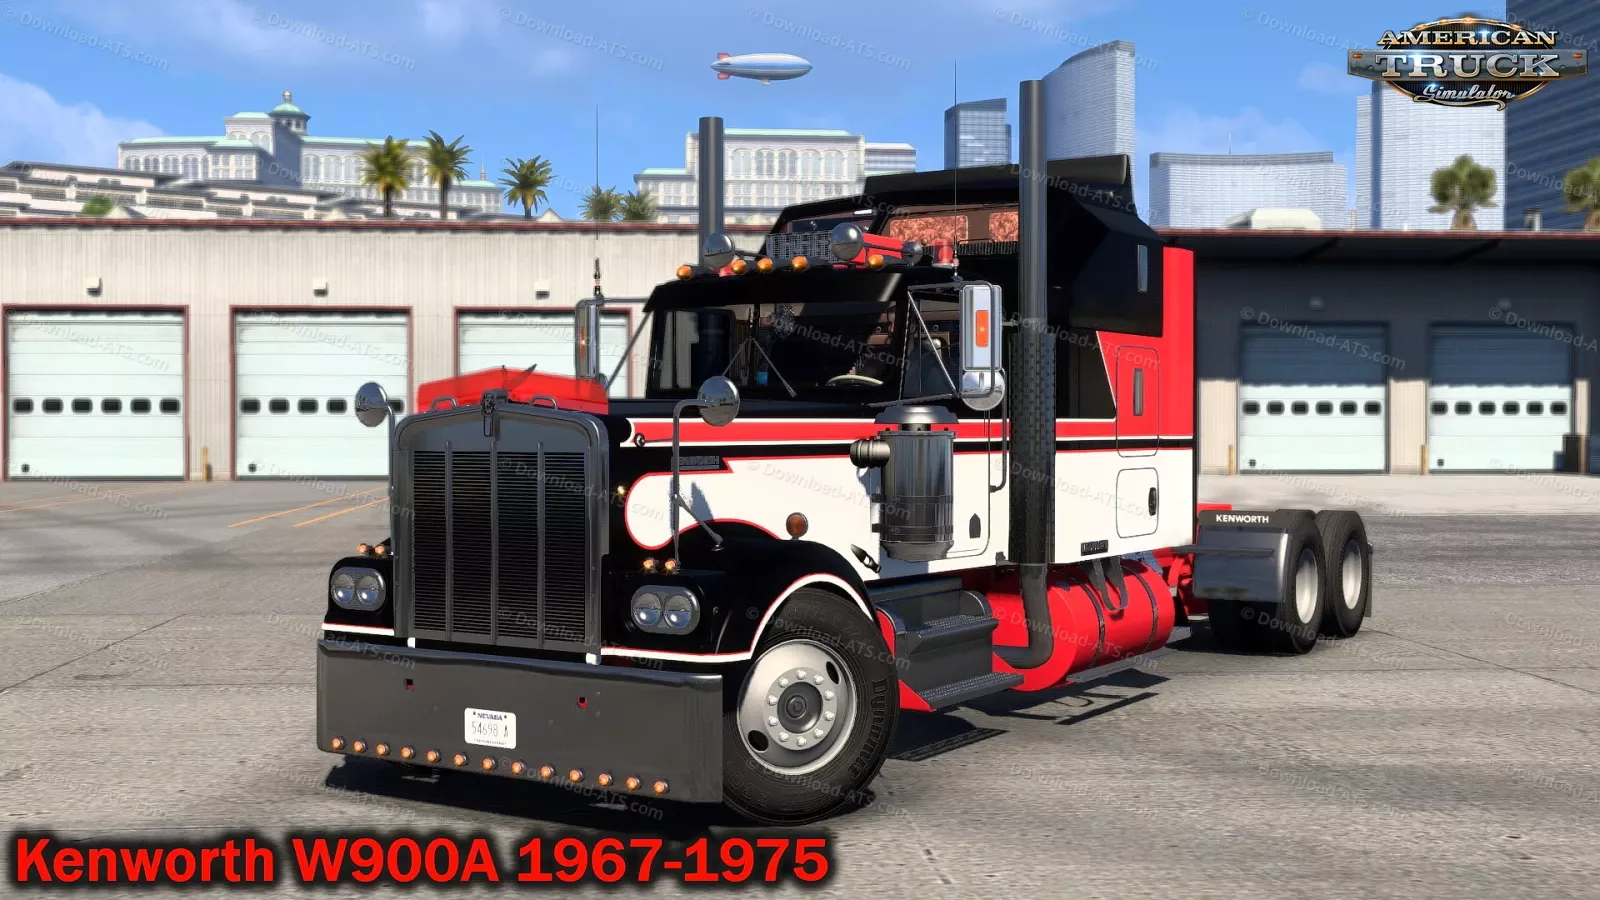 Kenworth W900A 1967-1975 + Interior v2.5 (1.50.x) for ATS